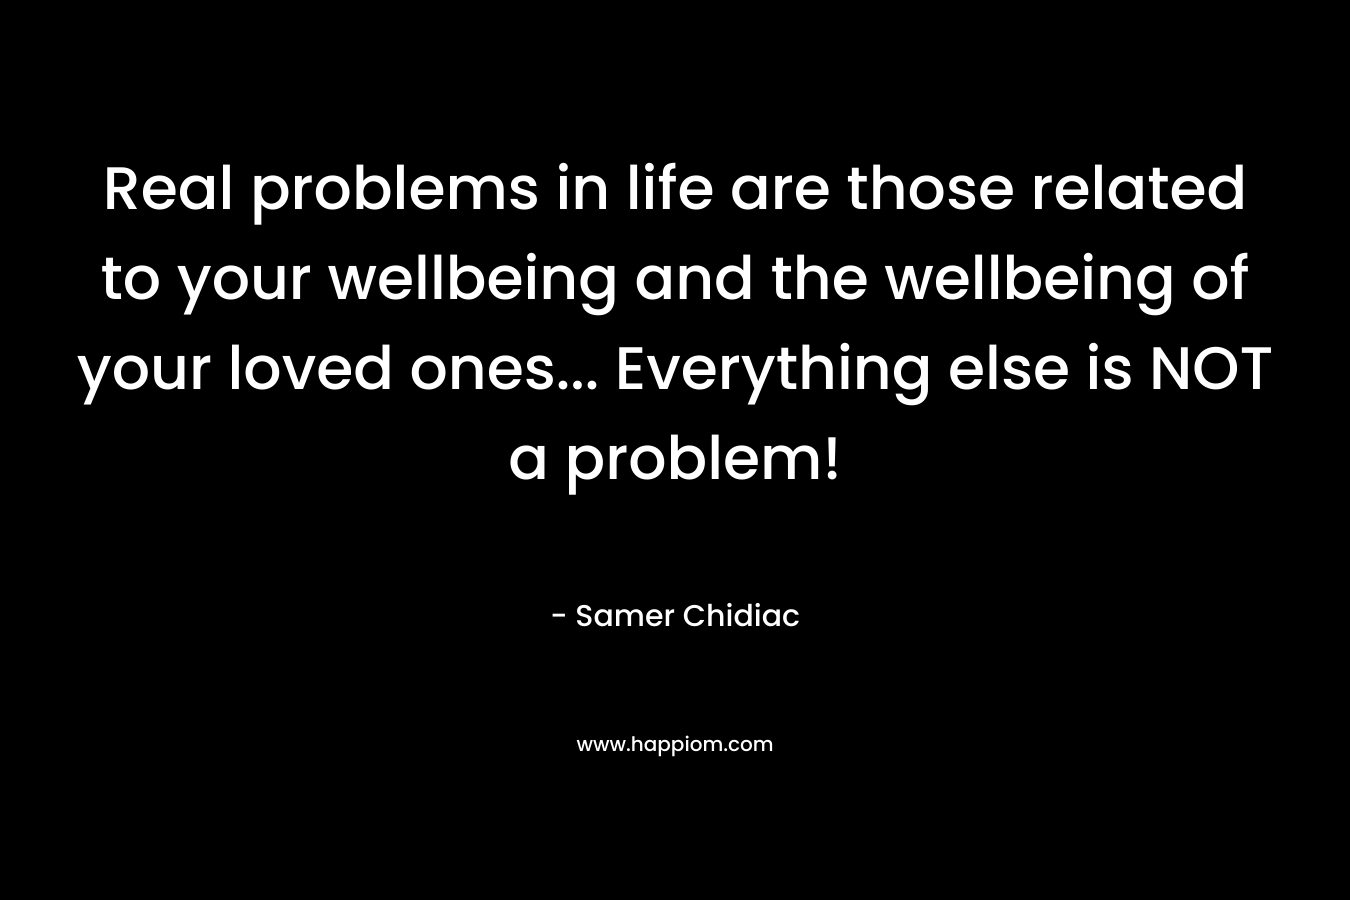 Real problems in life are those related to your wellbeing and the wellbeing of your loved ones... Everything else is NOT a problem!